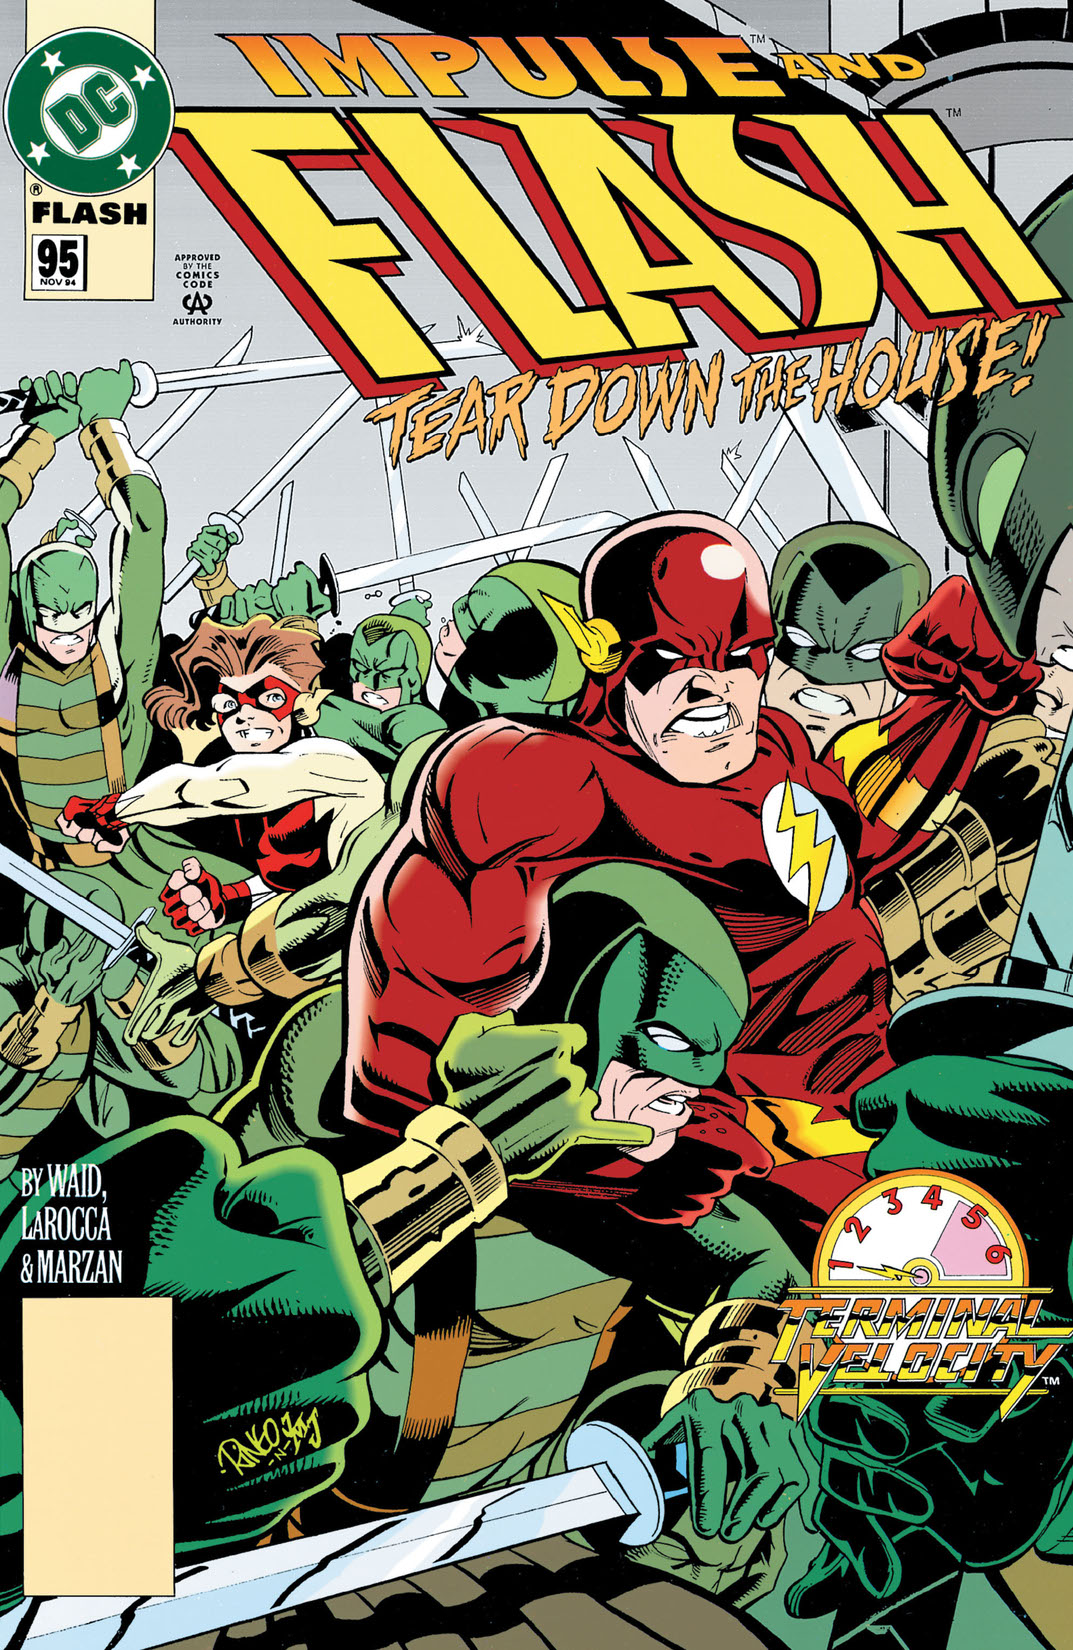 The Flash (1987-) #95 preview images